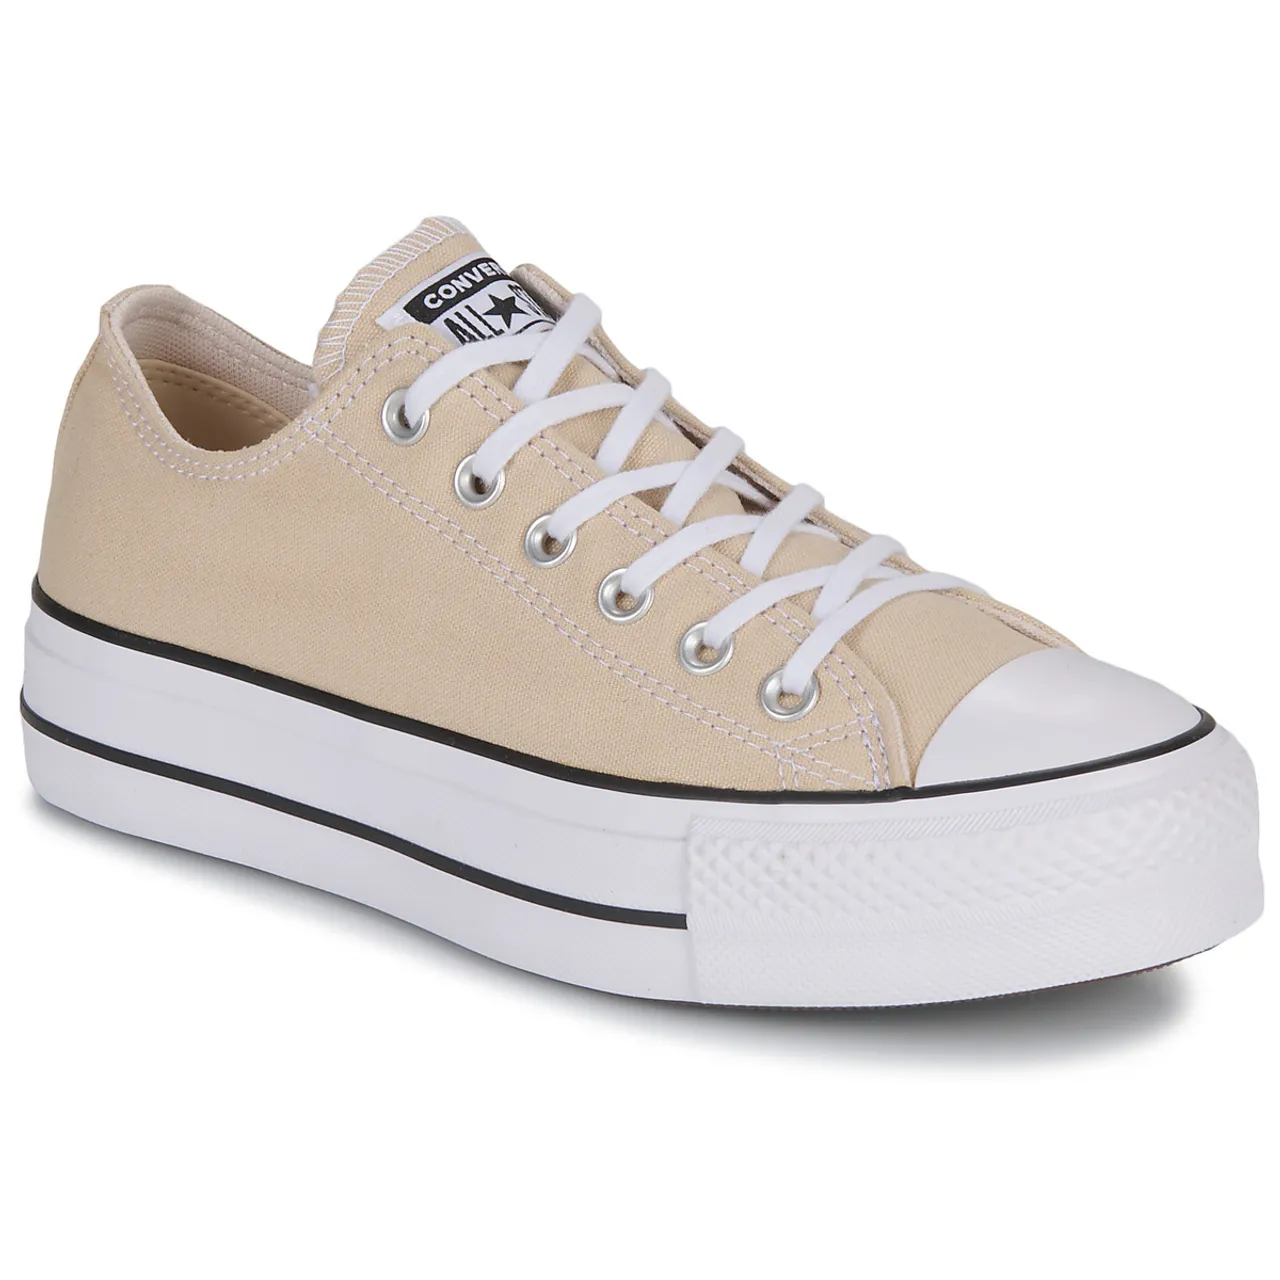 Converse  CHUCK TAYLOR ALL STAR LIFT PLATFORM SEASONAL COLOR-OAT MILK/WHIT  women's Shoes (Trainers) in Beige